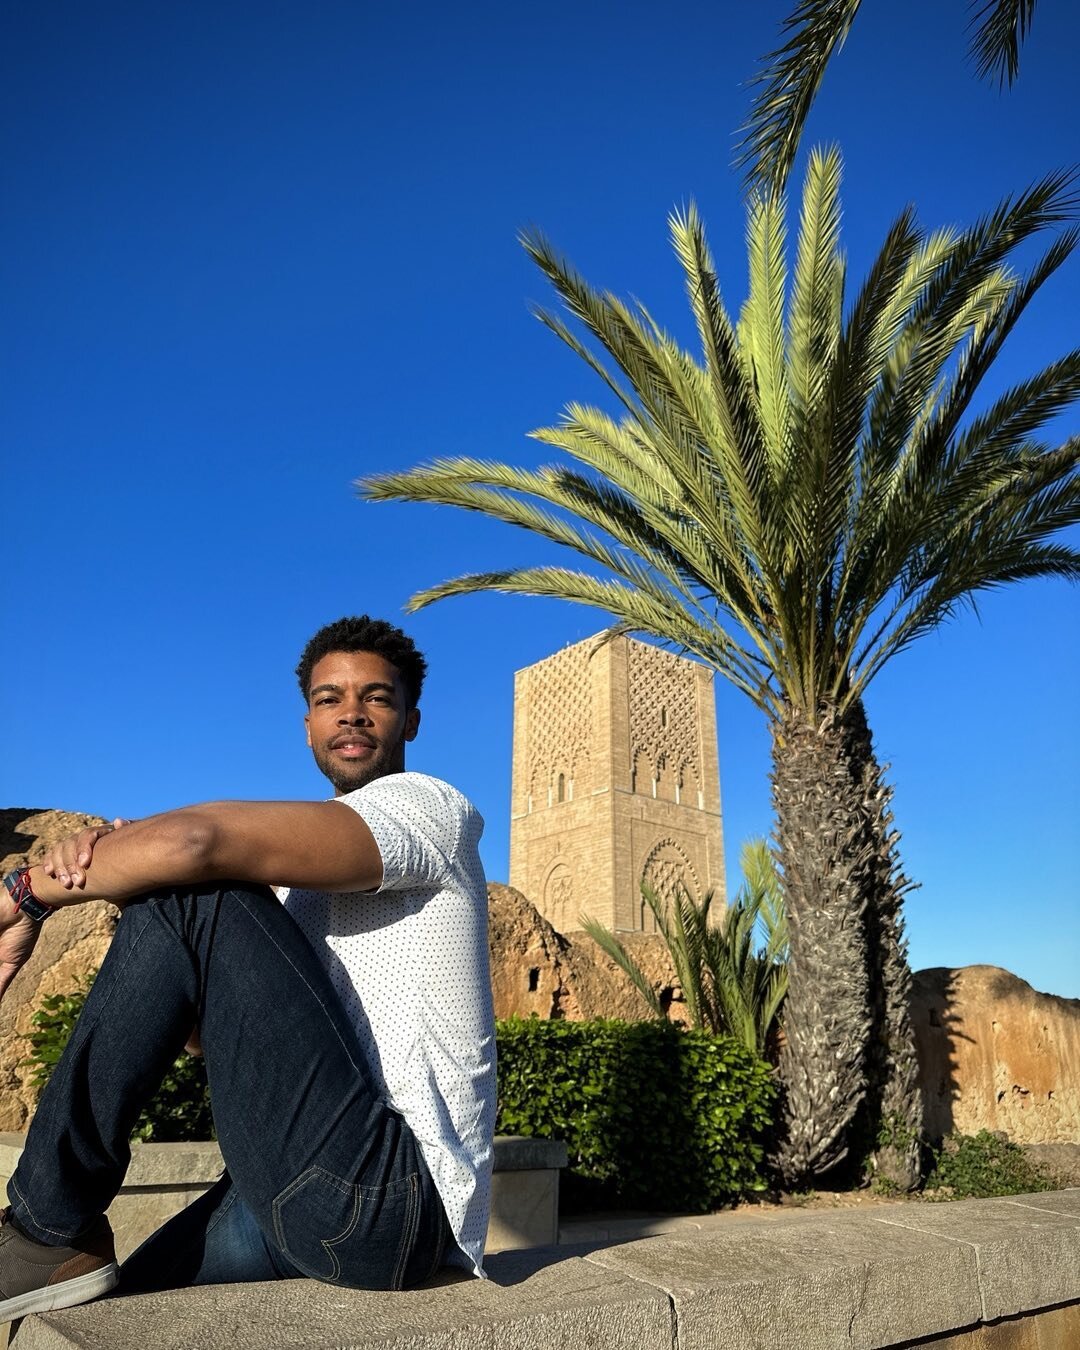 Photo backstory!! 

This photo was taken outside the Hassan Tower and the Mausoleum of Mohammed V. They were the first stop of my first day in Rabat, Morrocco! After all my research, I was very excited to see these landmarks. 

However, when I arrive